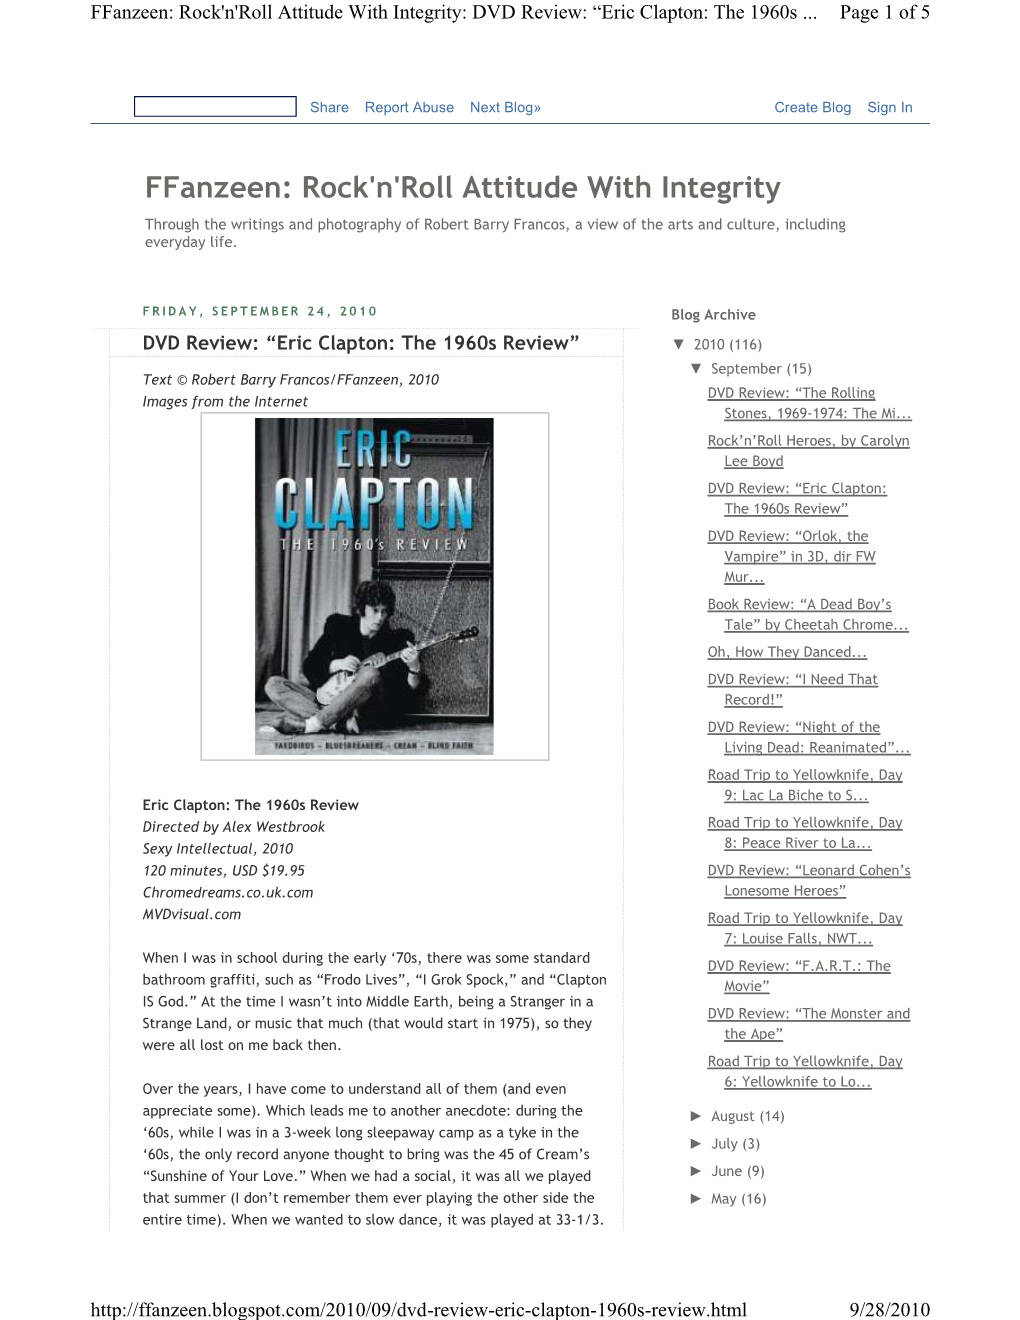 Ffanzeen: Rock'n'roll Attitude with Integrity: DVD Review: “Eric Clapton: the 1960S